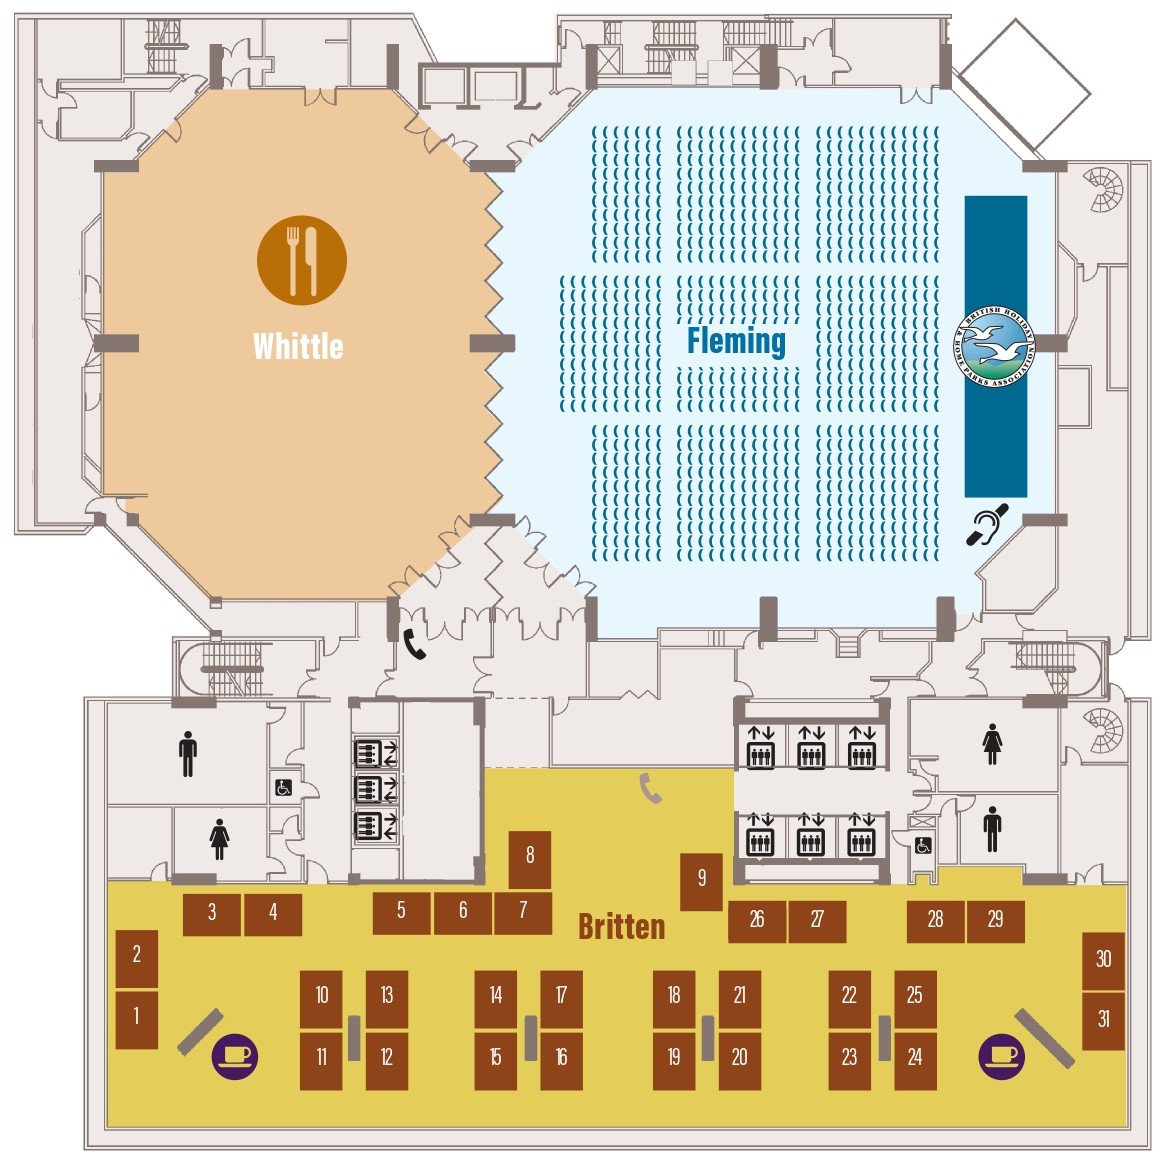 Floor plan showing positions of exhibition stands in Britten, with catering in the Whittle and conference in the Fleming. There is an induction loop in the Fleming.